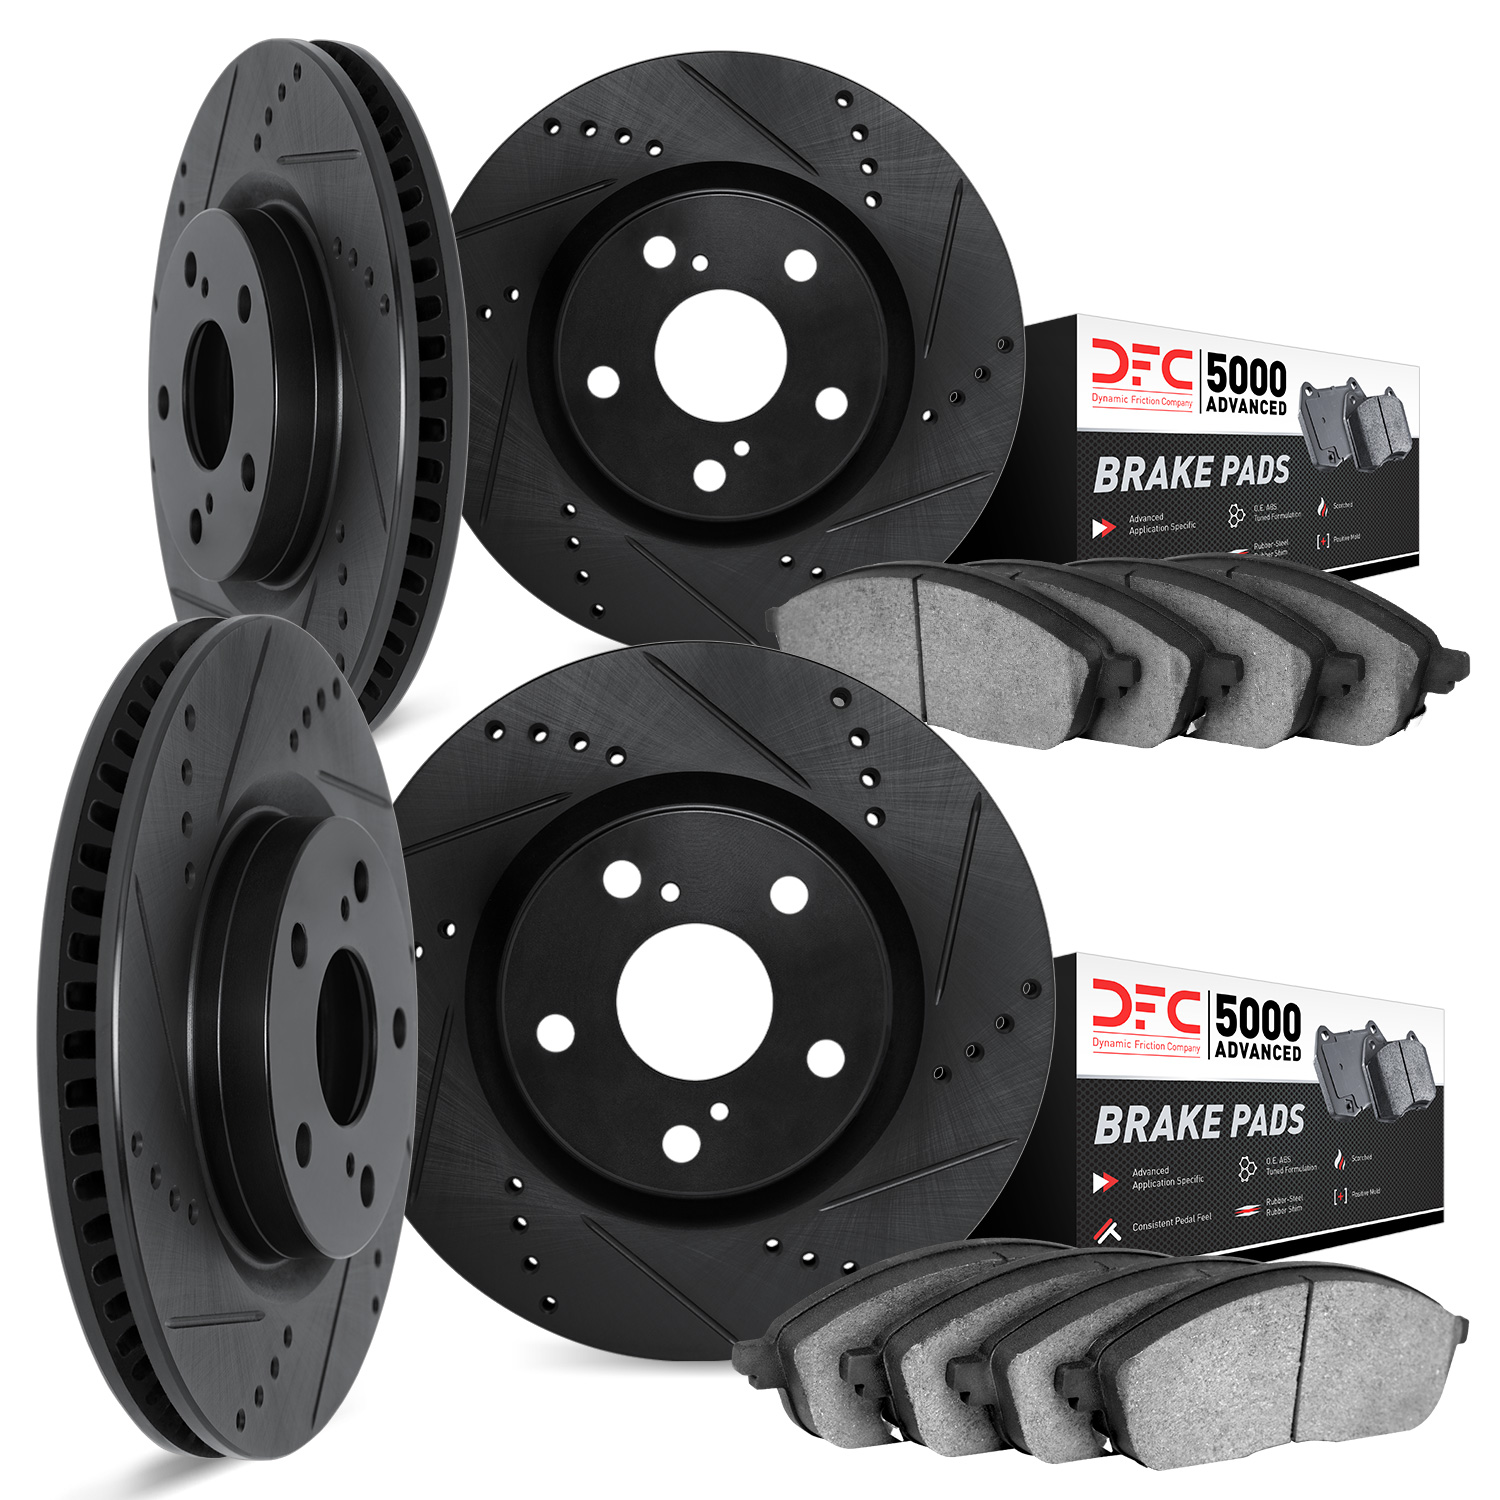 8504-31024 Drilled/Slotted Brake Rotors w/5000 Advanced Brake Pads Kit [Black], 2008-2013 BMW, Position: Front and Rear